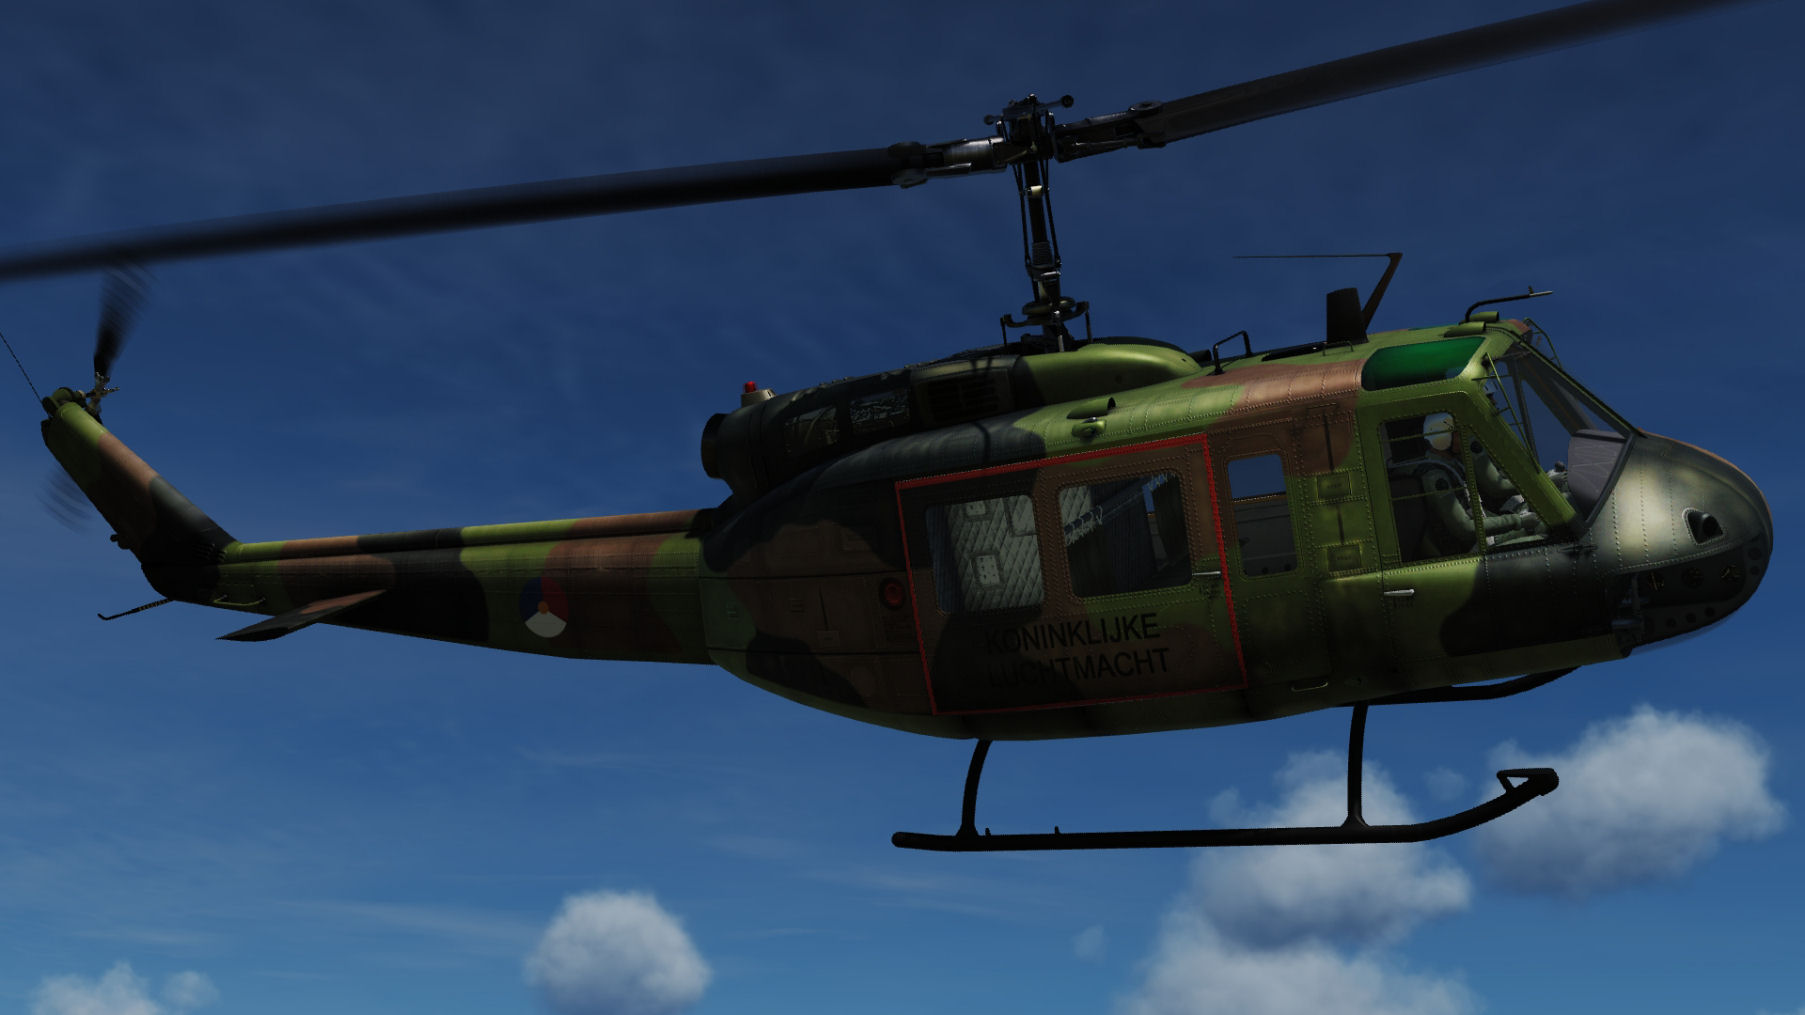 RNLAF Forrest Camo, updated spec files for the standard RNLAF livery by ED. 